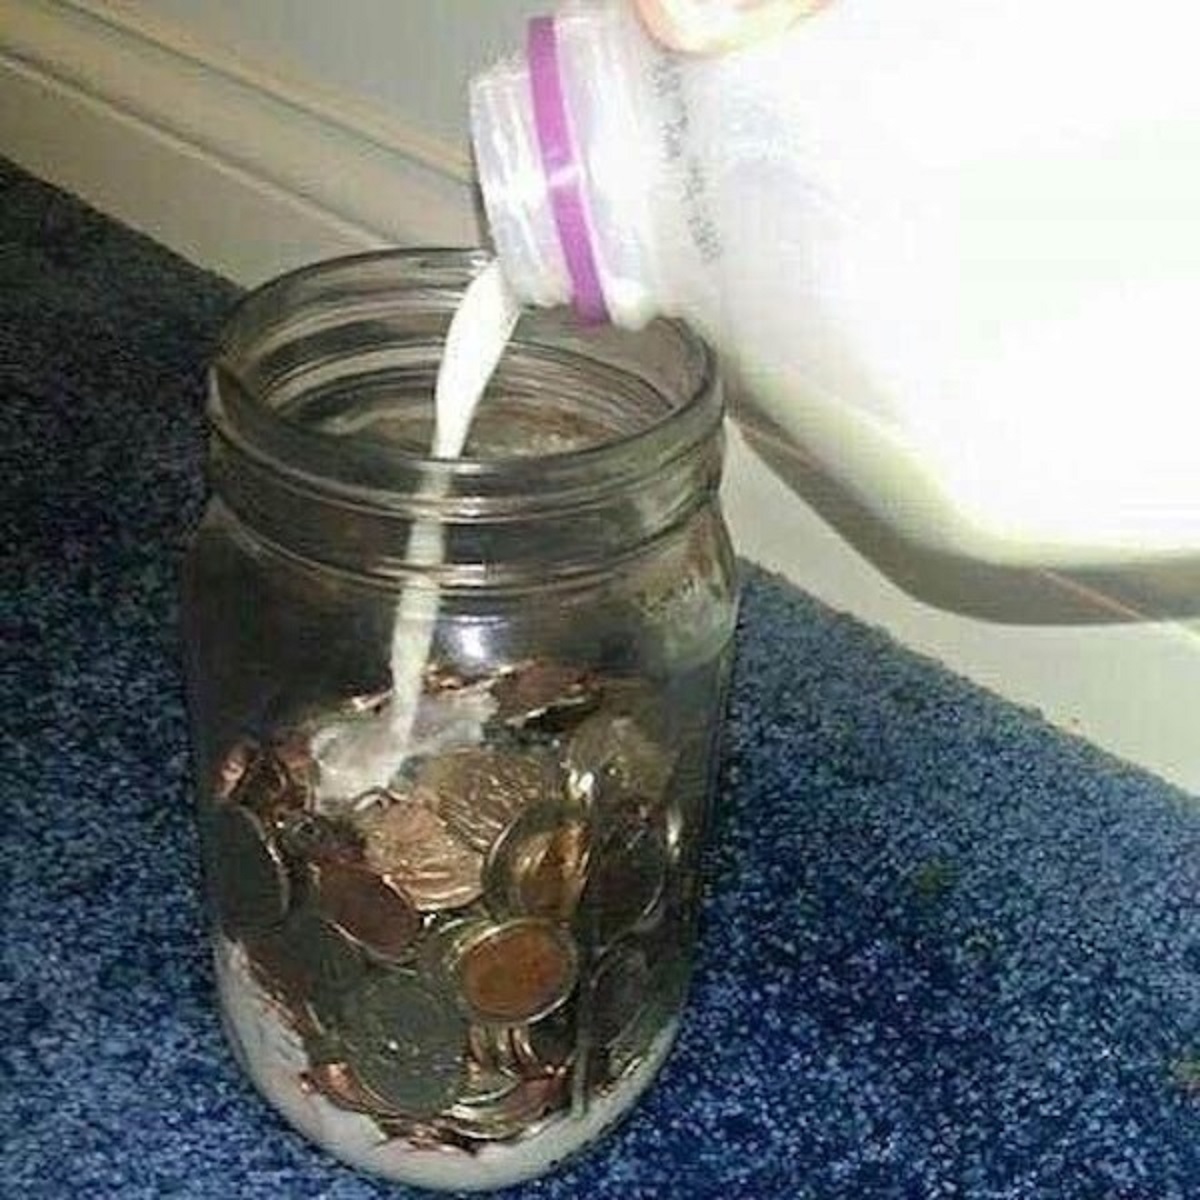 milk and coins